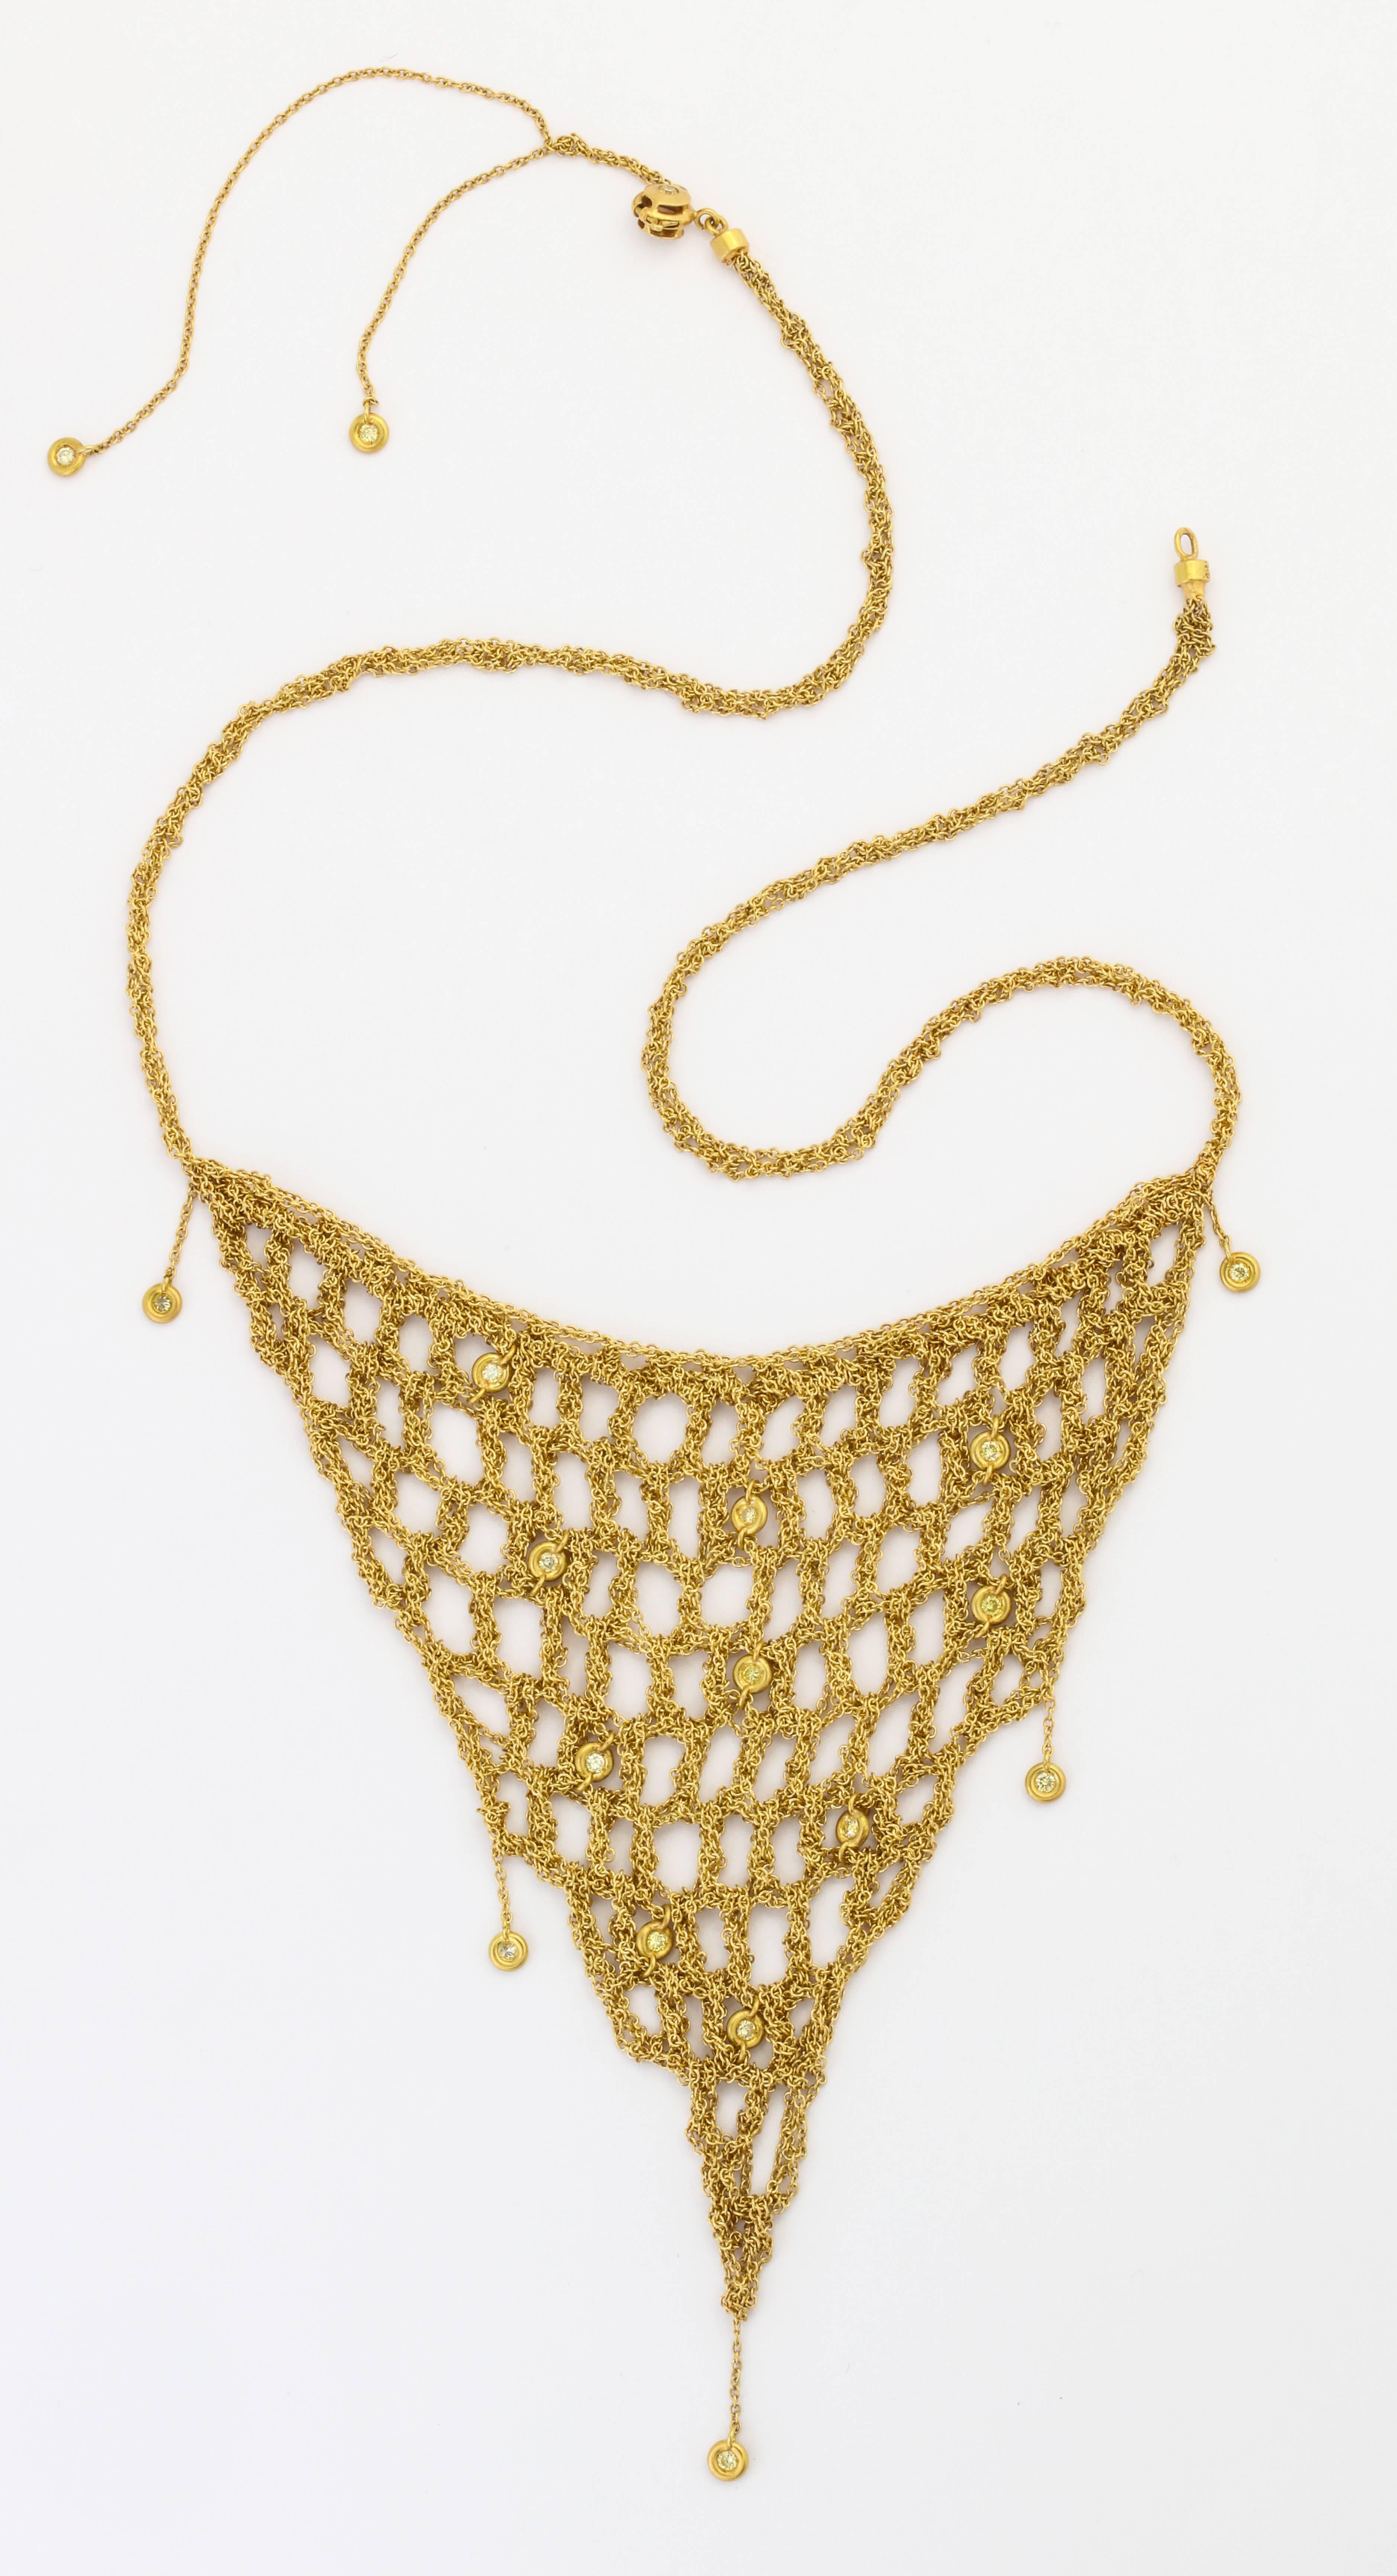 H Stern Diamond and Gold Mesh Necklace 2